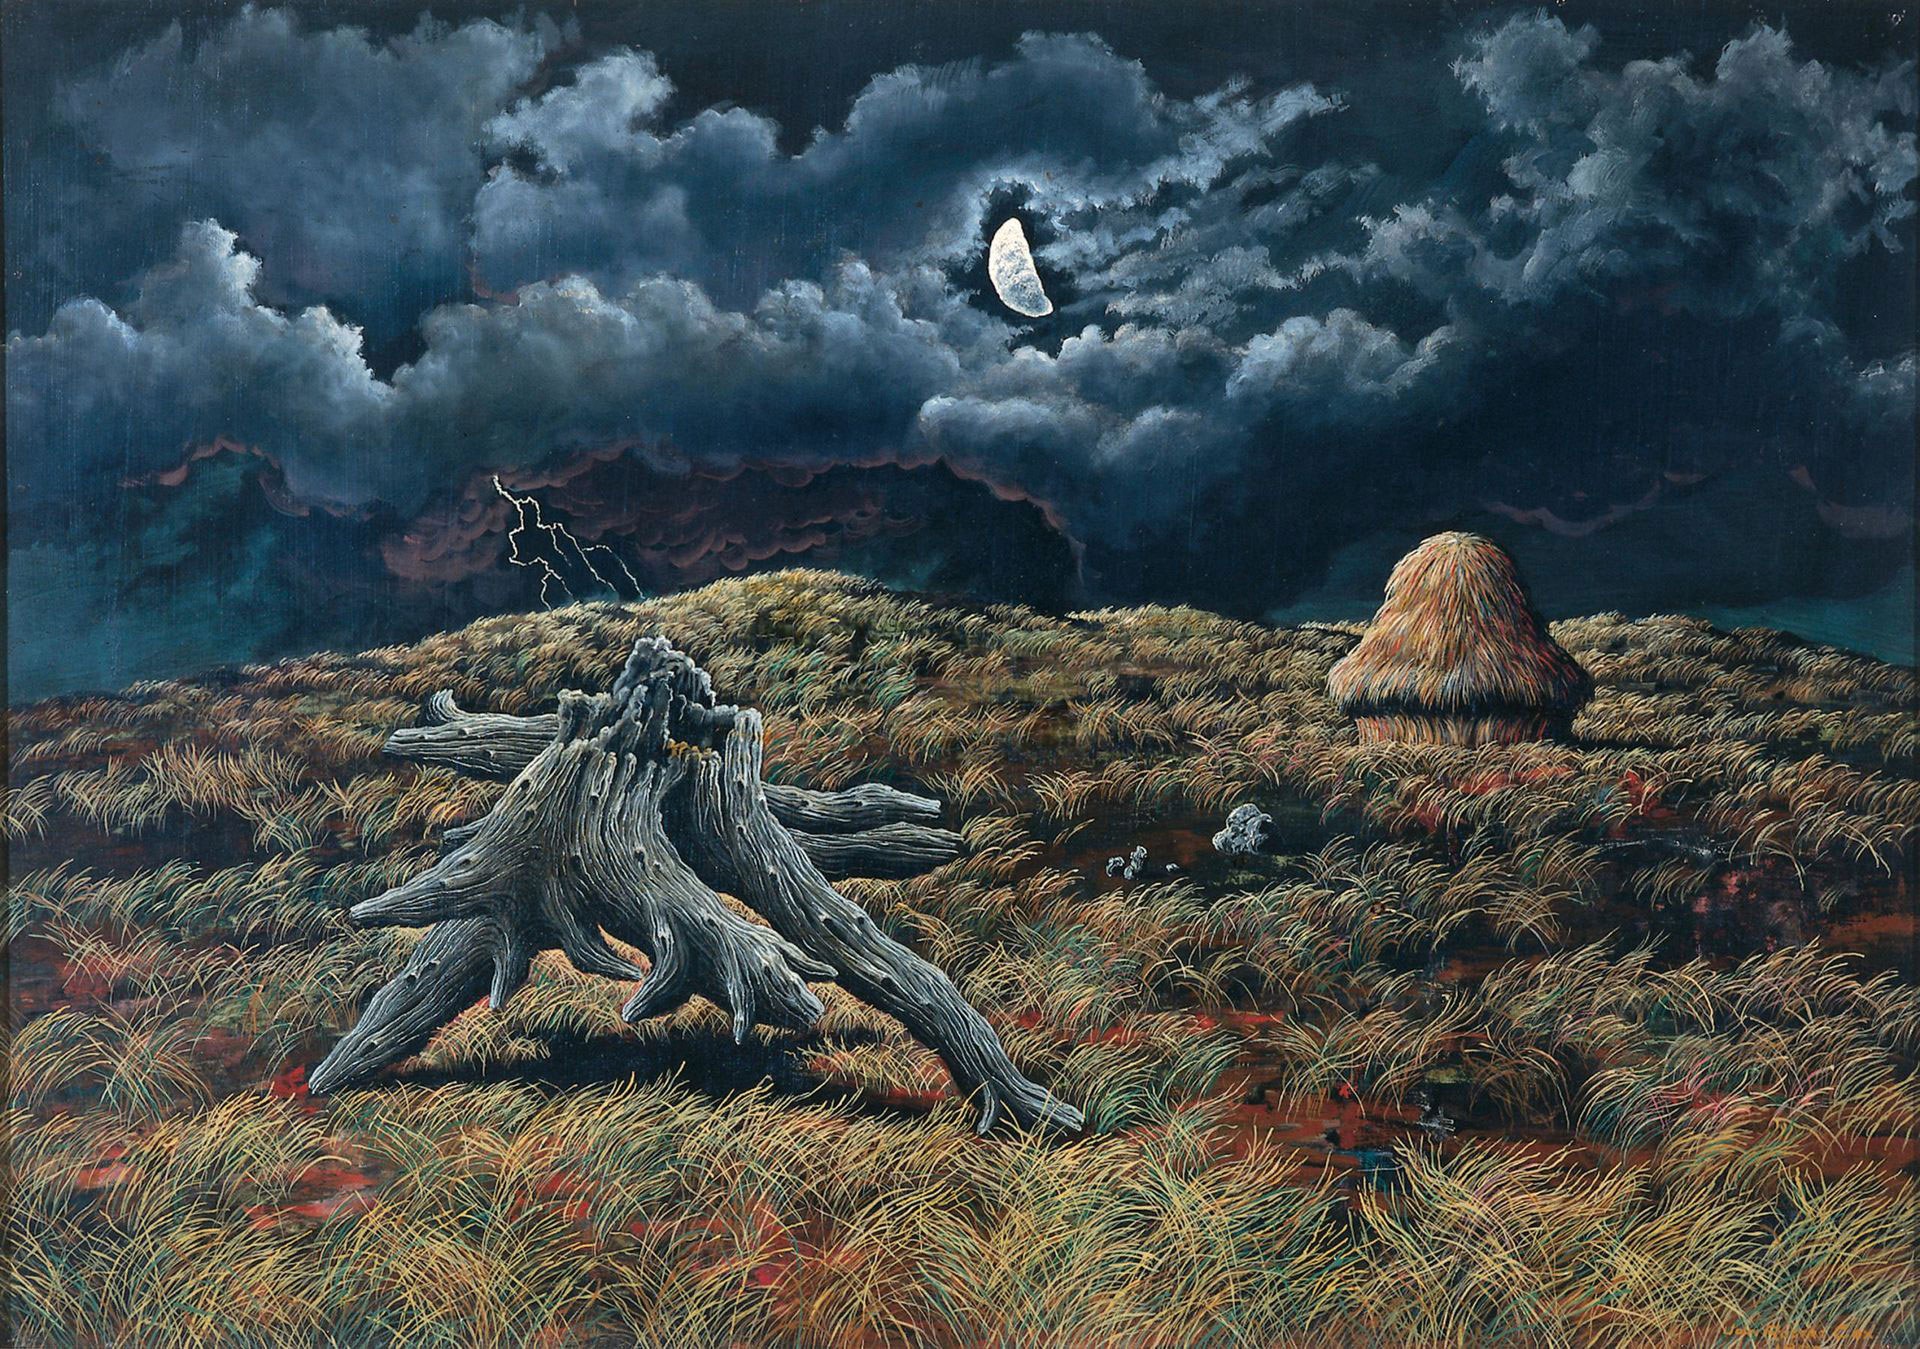 John Rogers Cox, American, 1915–1990. Nocturne - Silver and Grey, 1952. Oil and tempera on Masonite, 17 x 23 ⅞ x 15/16 in. Gift of Pat Glascock and Michael D. Hall in memory of all American Regional artists, Inlander Collection, 2003.22